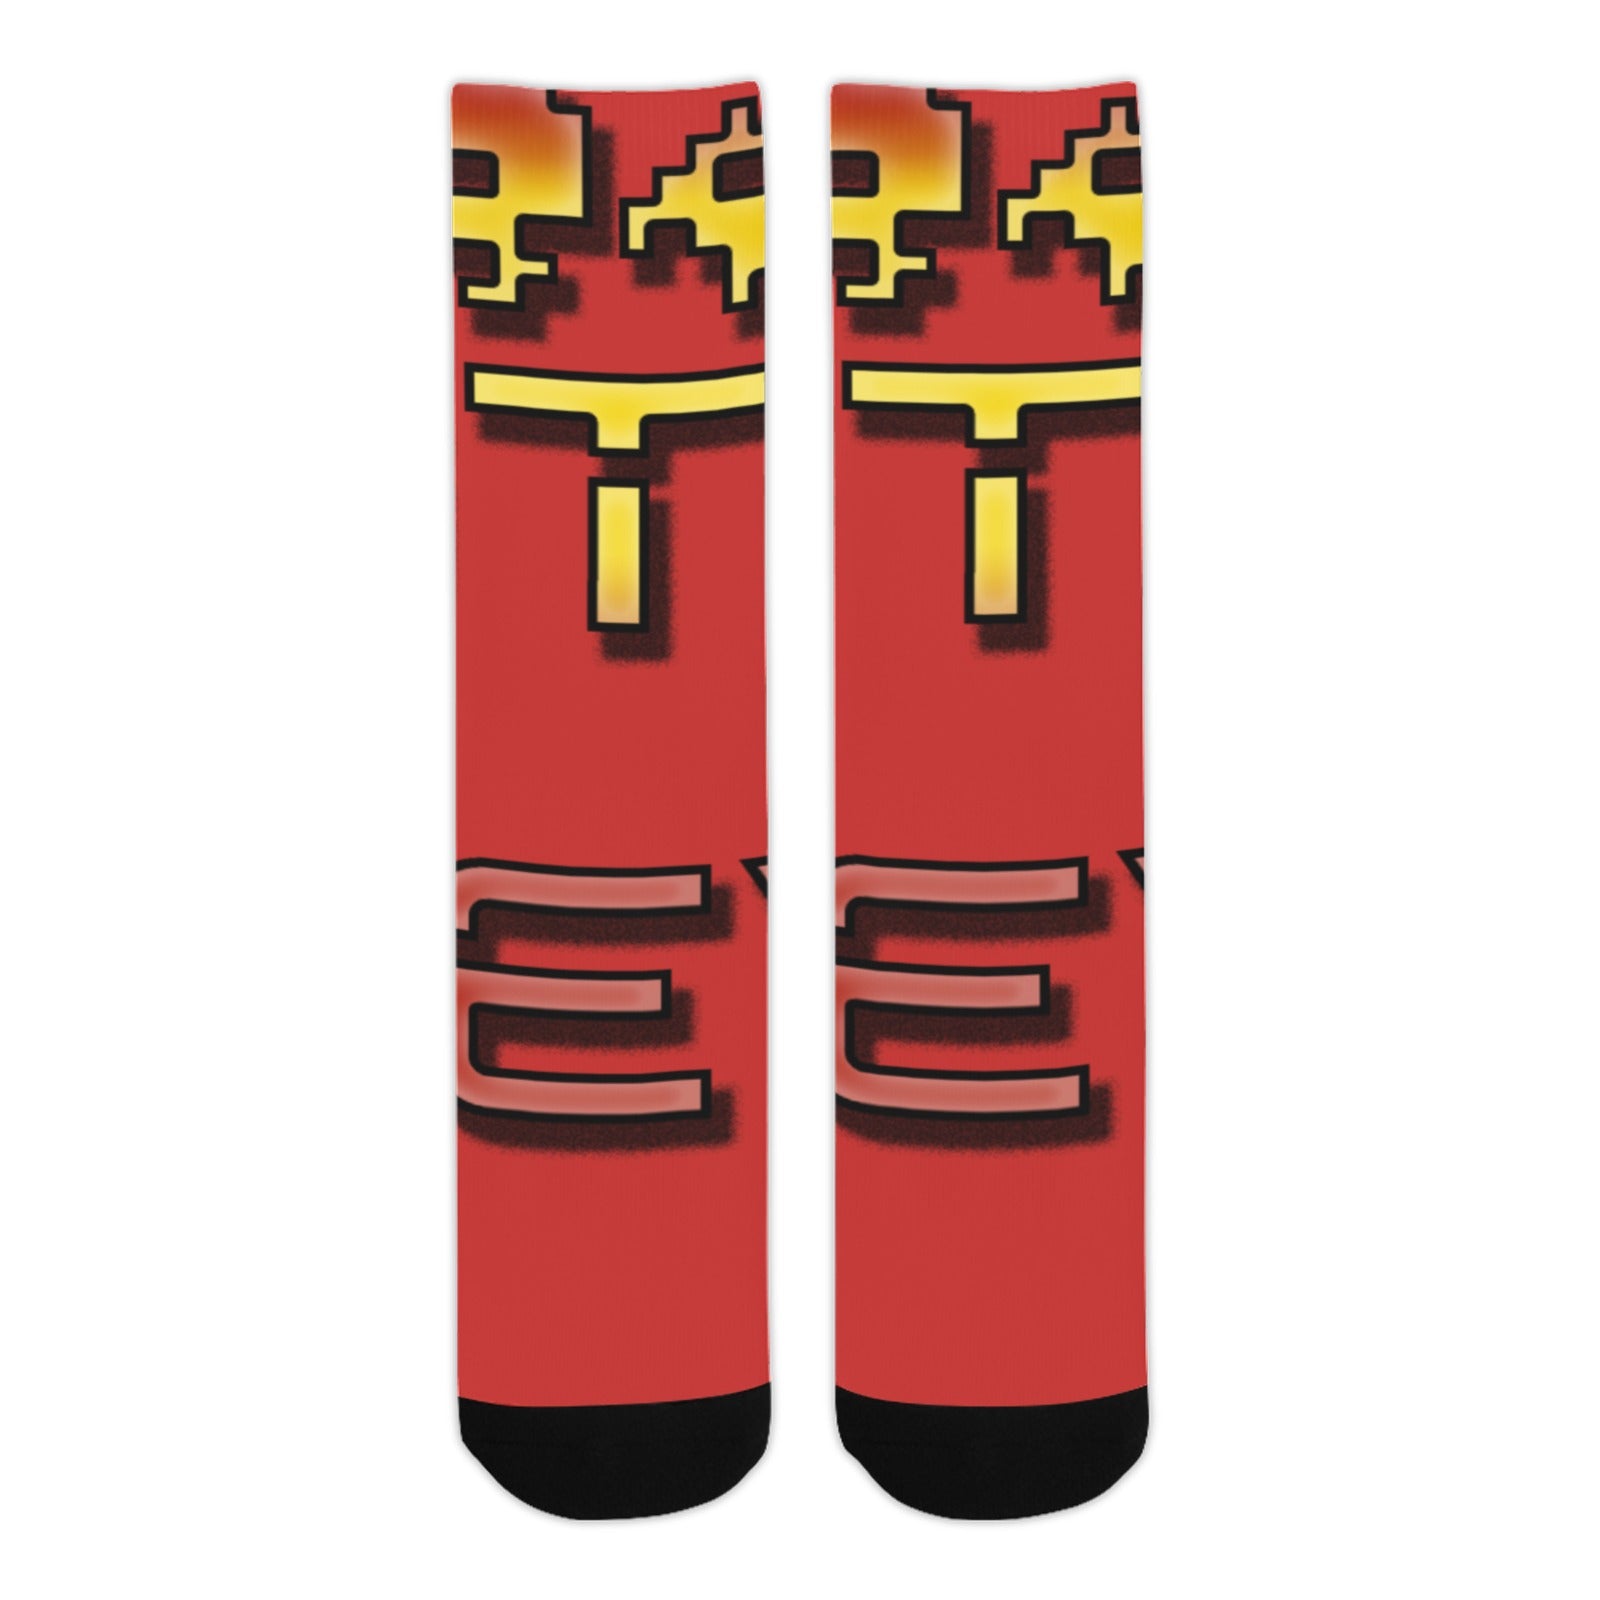 fz unisex socks - red one size / fz socks - red sublimated crew socks(made in usa)